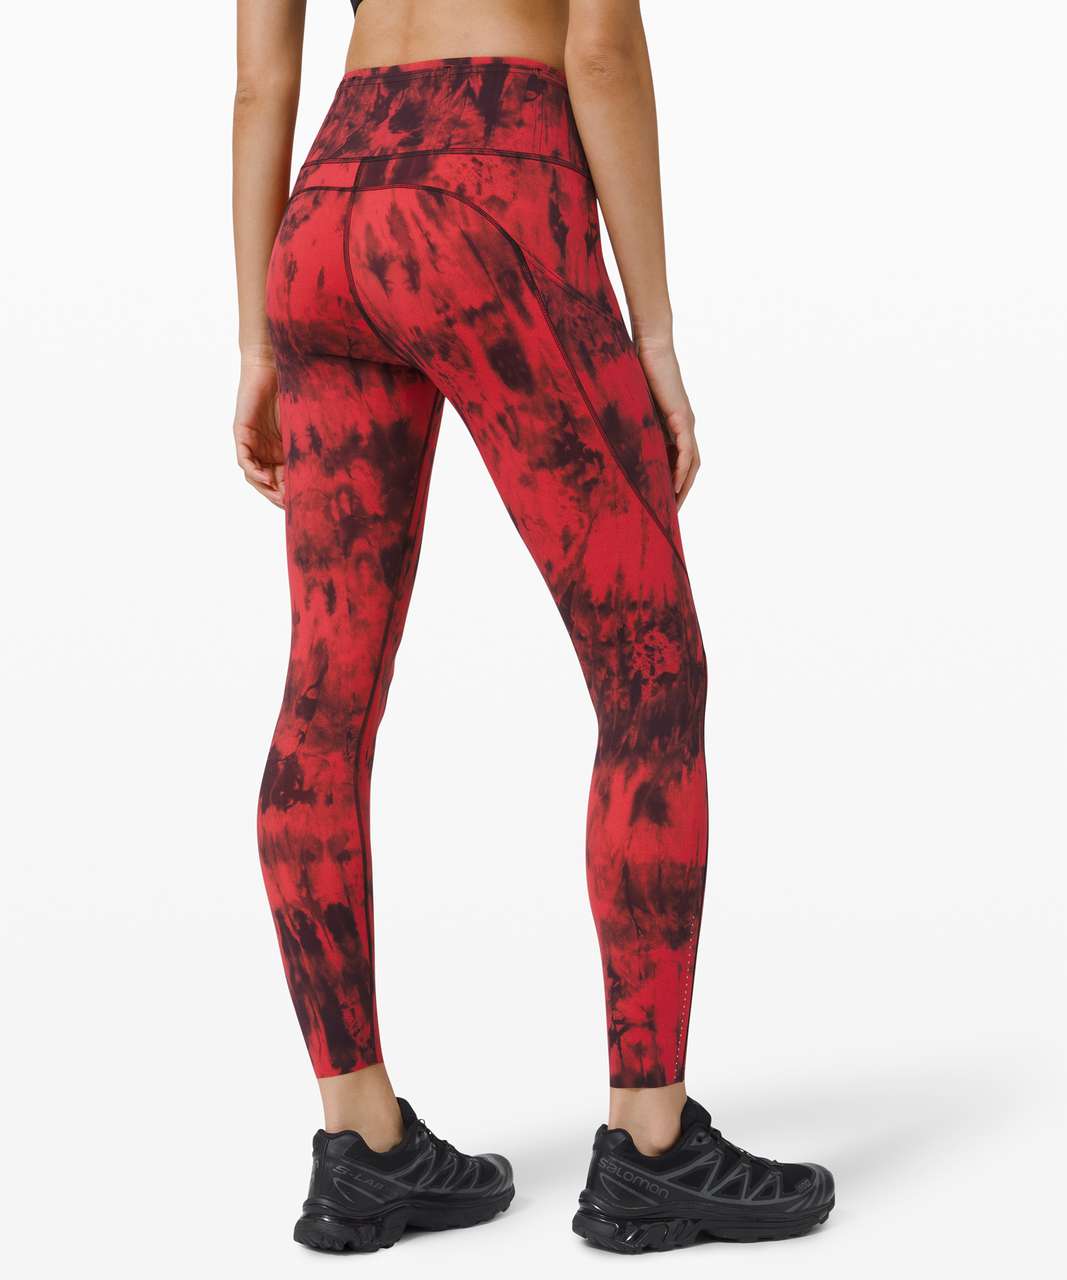 Lululemon Fast and Free Tight II 25" *Game Day - Game Day Red Black Multi